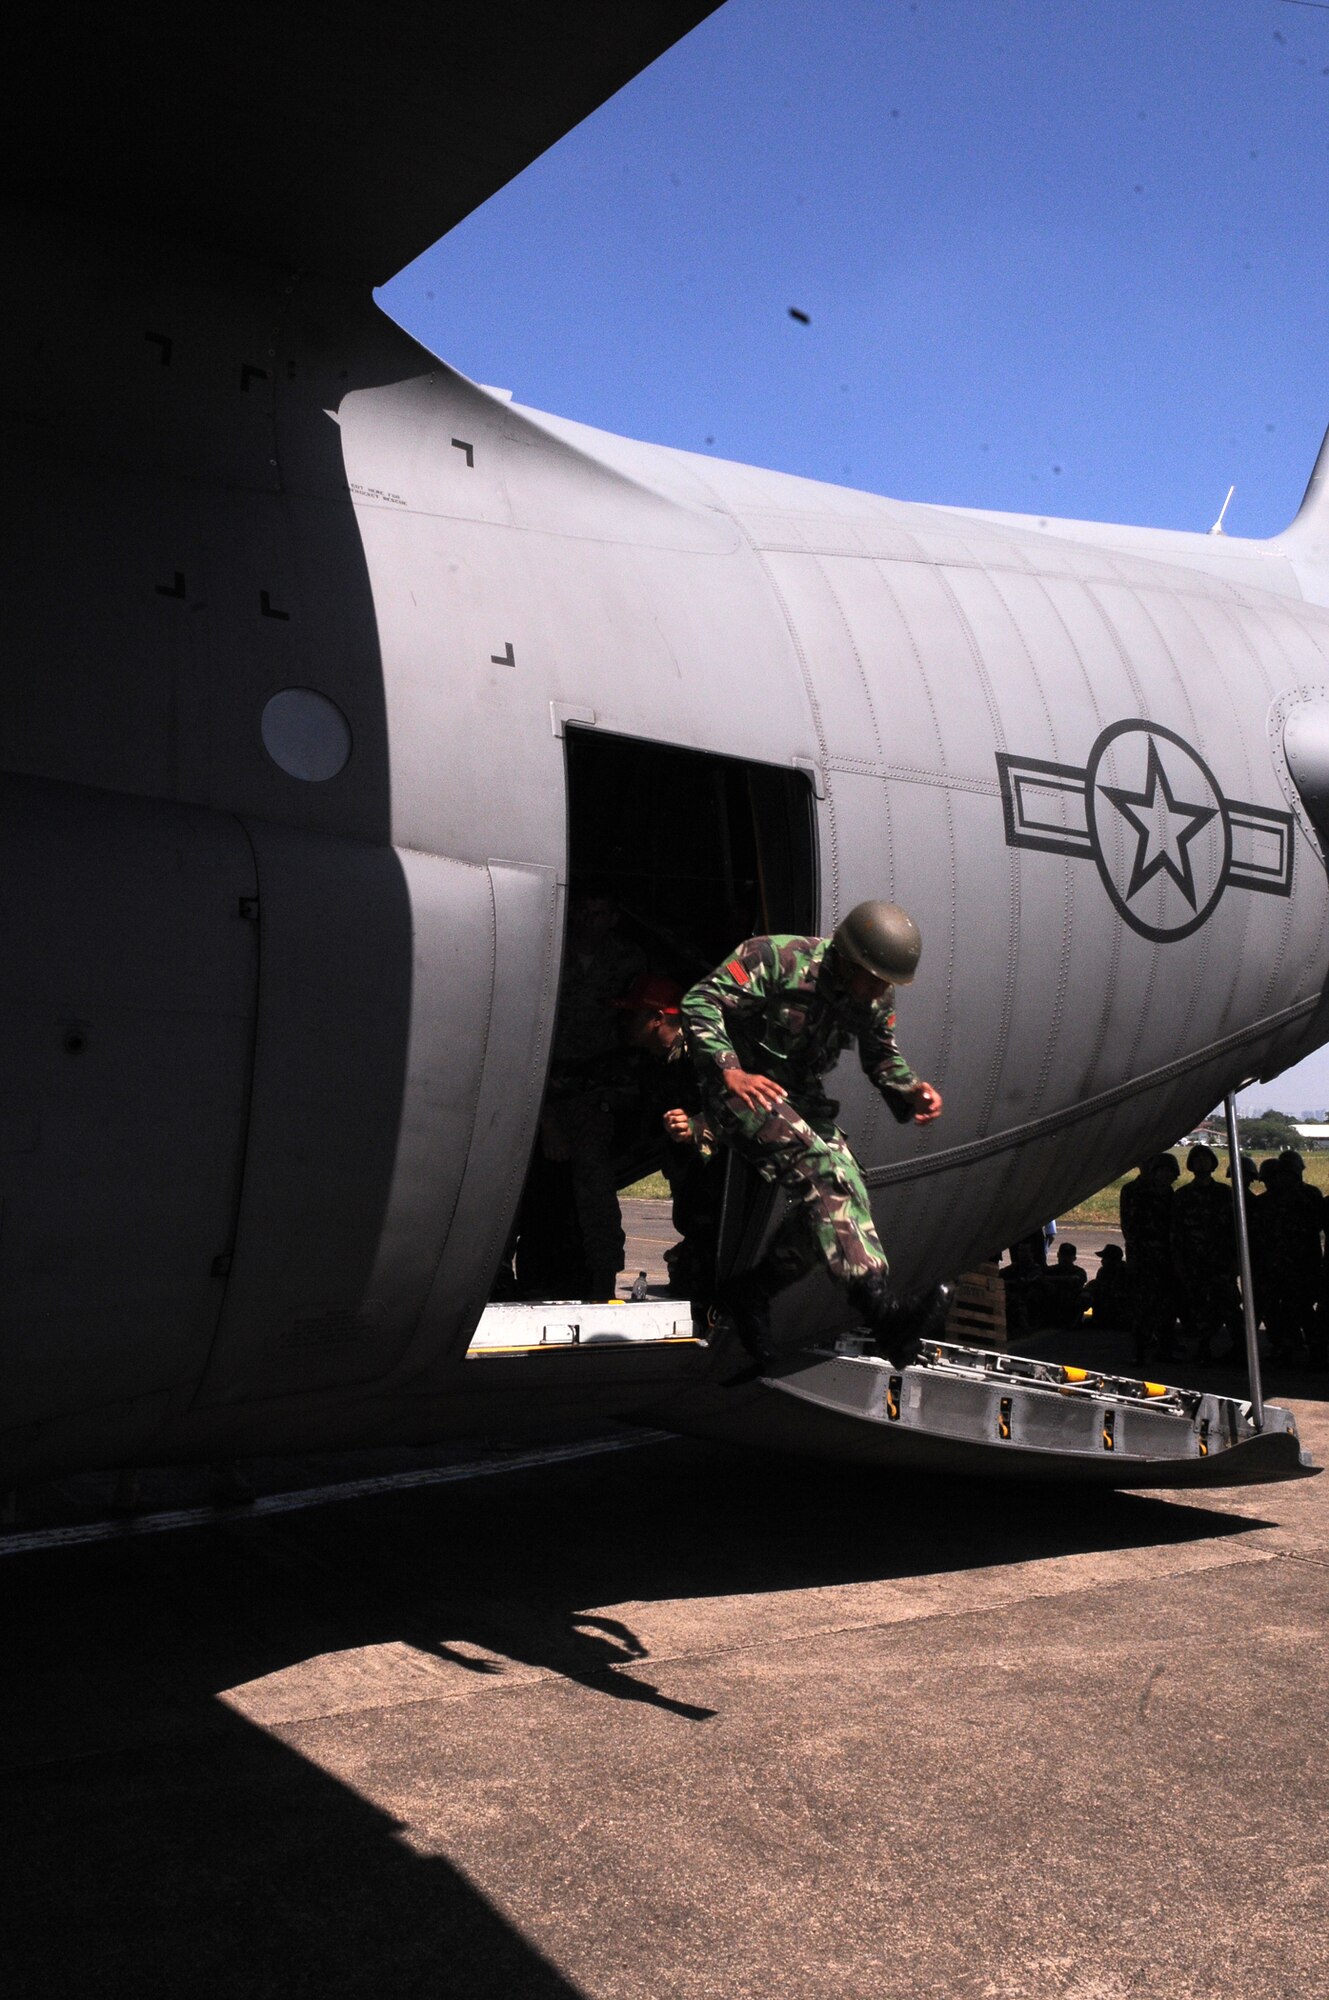 An Indonesian airman jumps from a U.S. Air Force C-130 Hercules during Exercise Cope West April 17, 2010, at Halim Air Base, Indonesia. (U.S. Air Force photo)